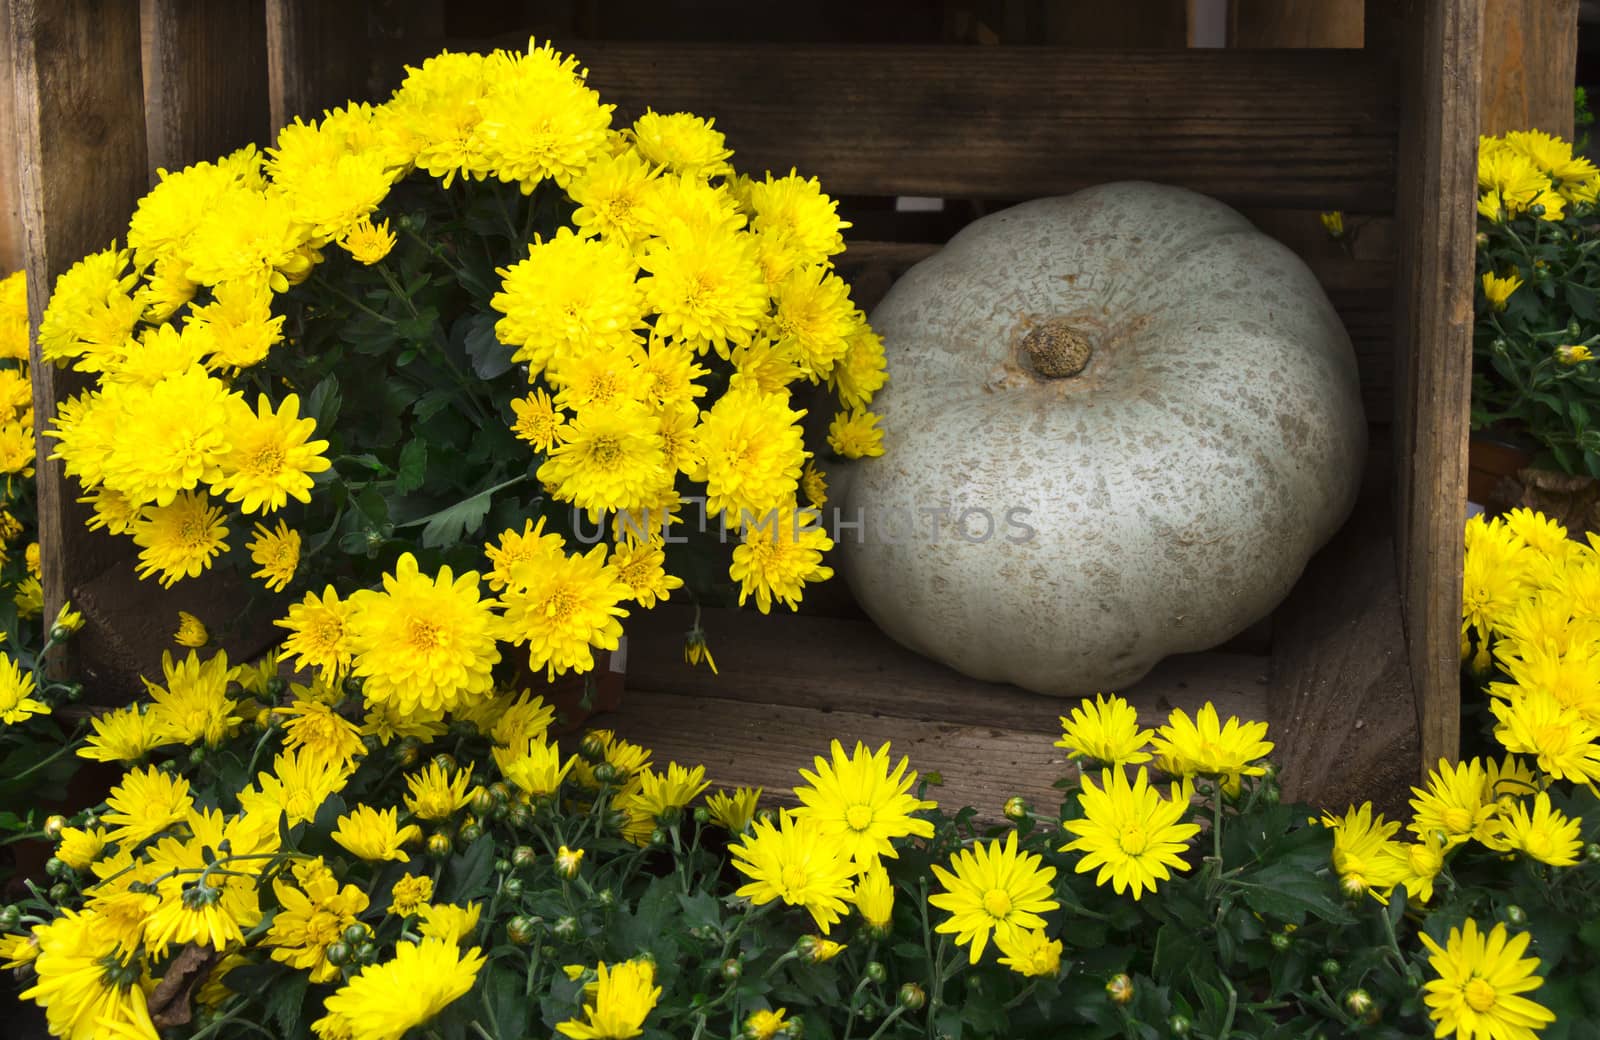 Flowers and pumpkin decoration on a wooden background